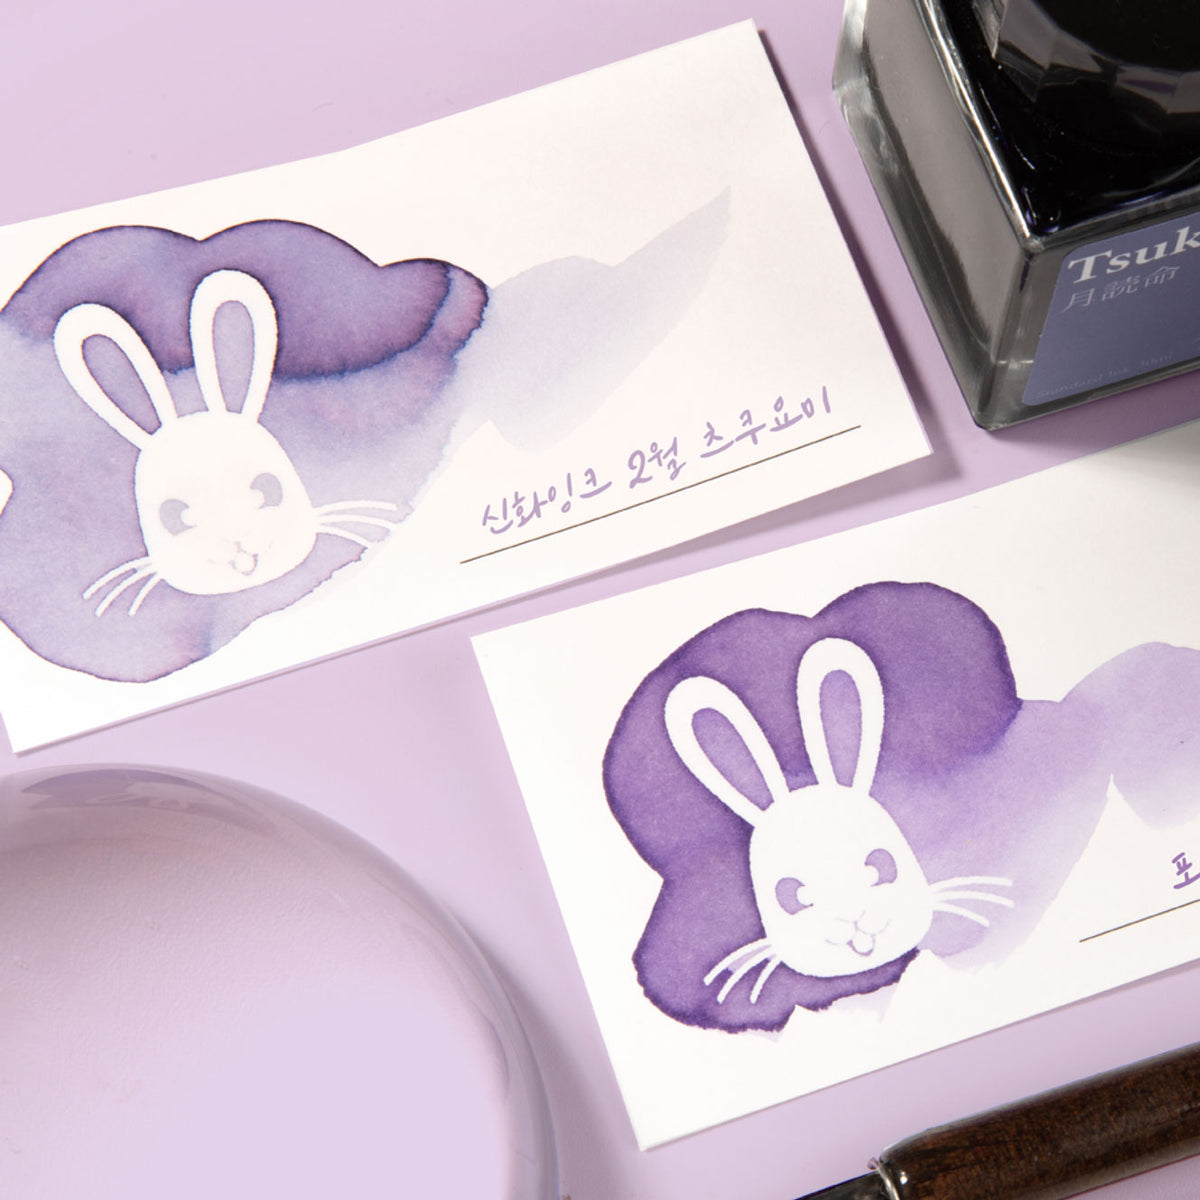 Wearingeul - Ink Swatch Cards - Rabbit <Outgoing>